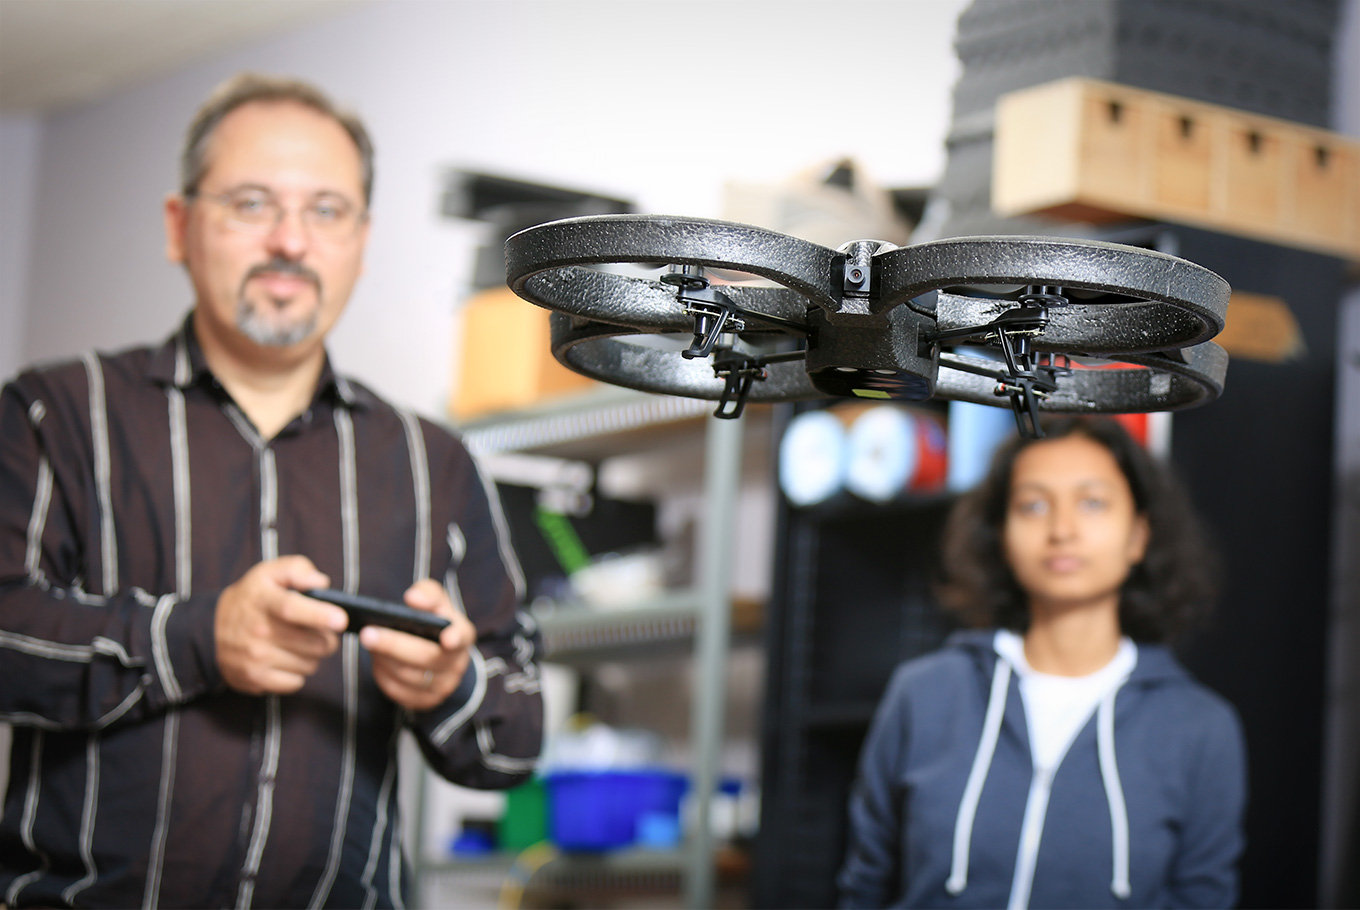 Teacher and student control drone which is flying in air.